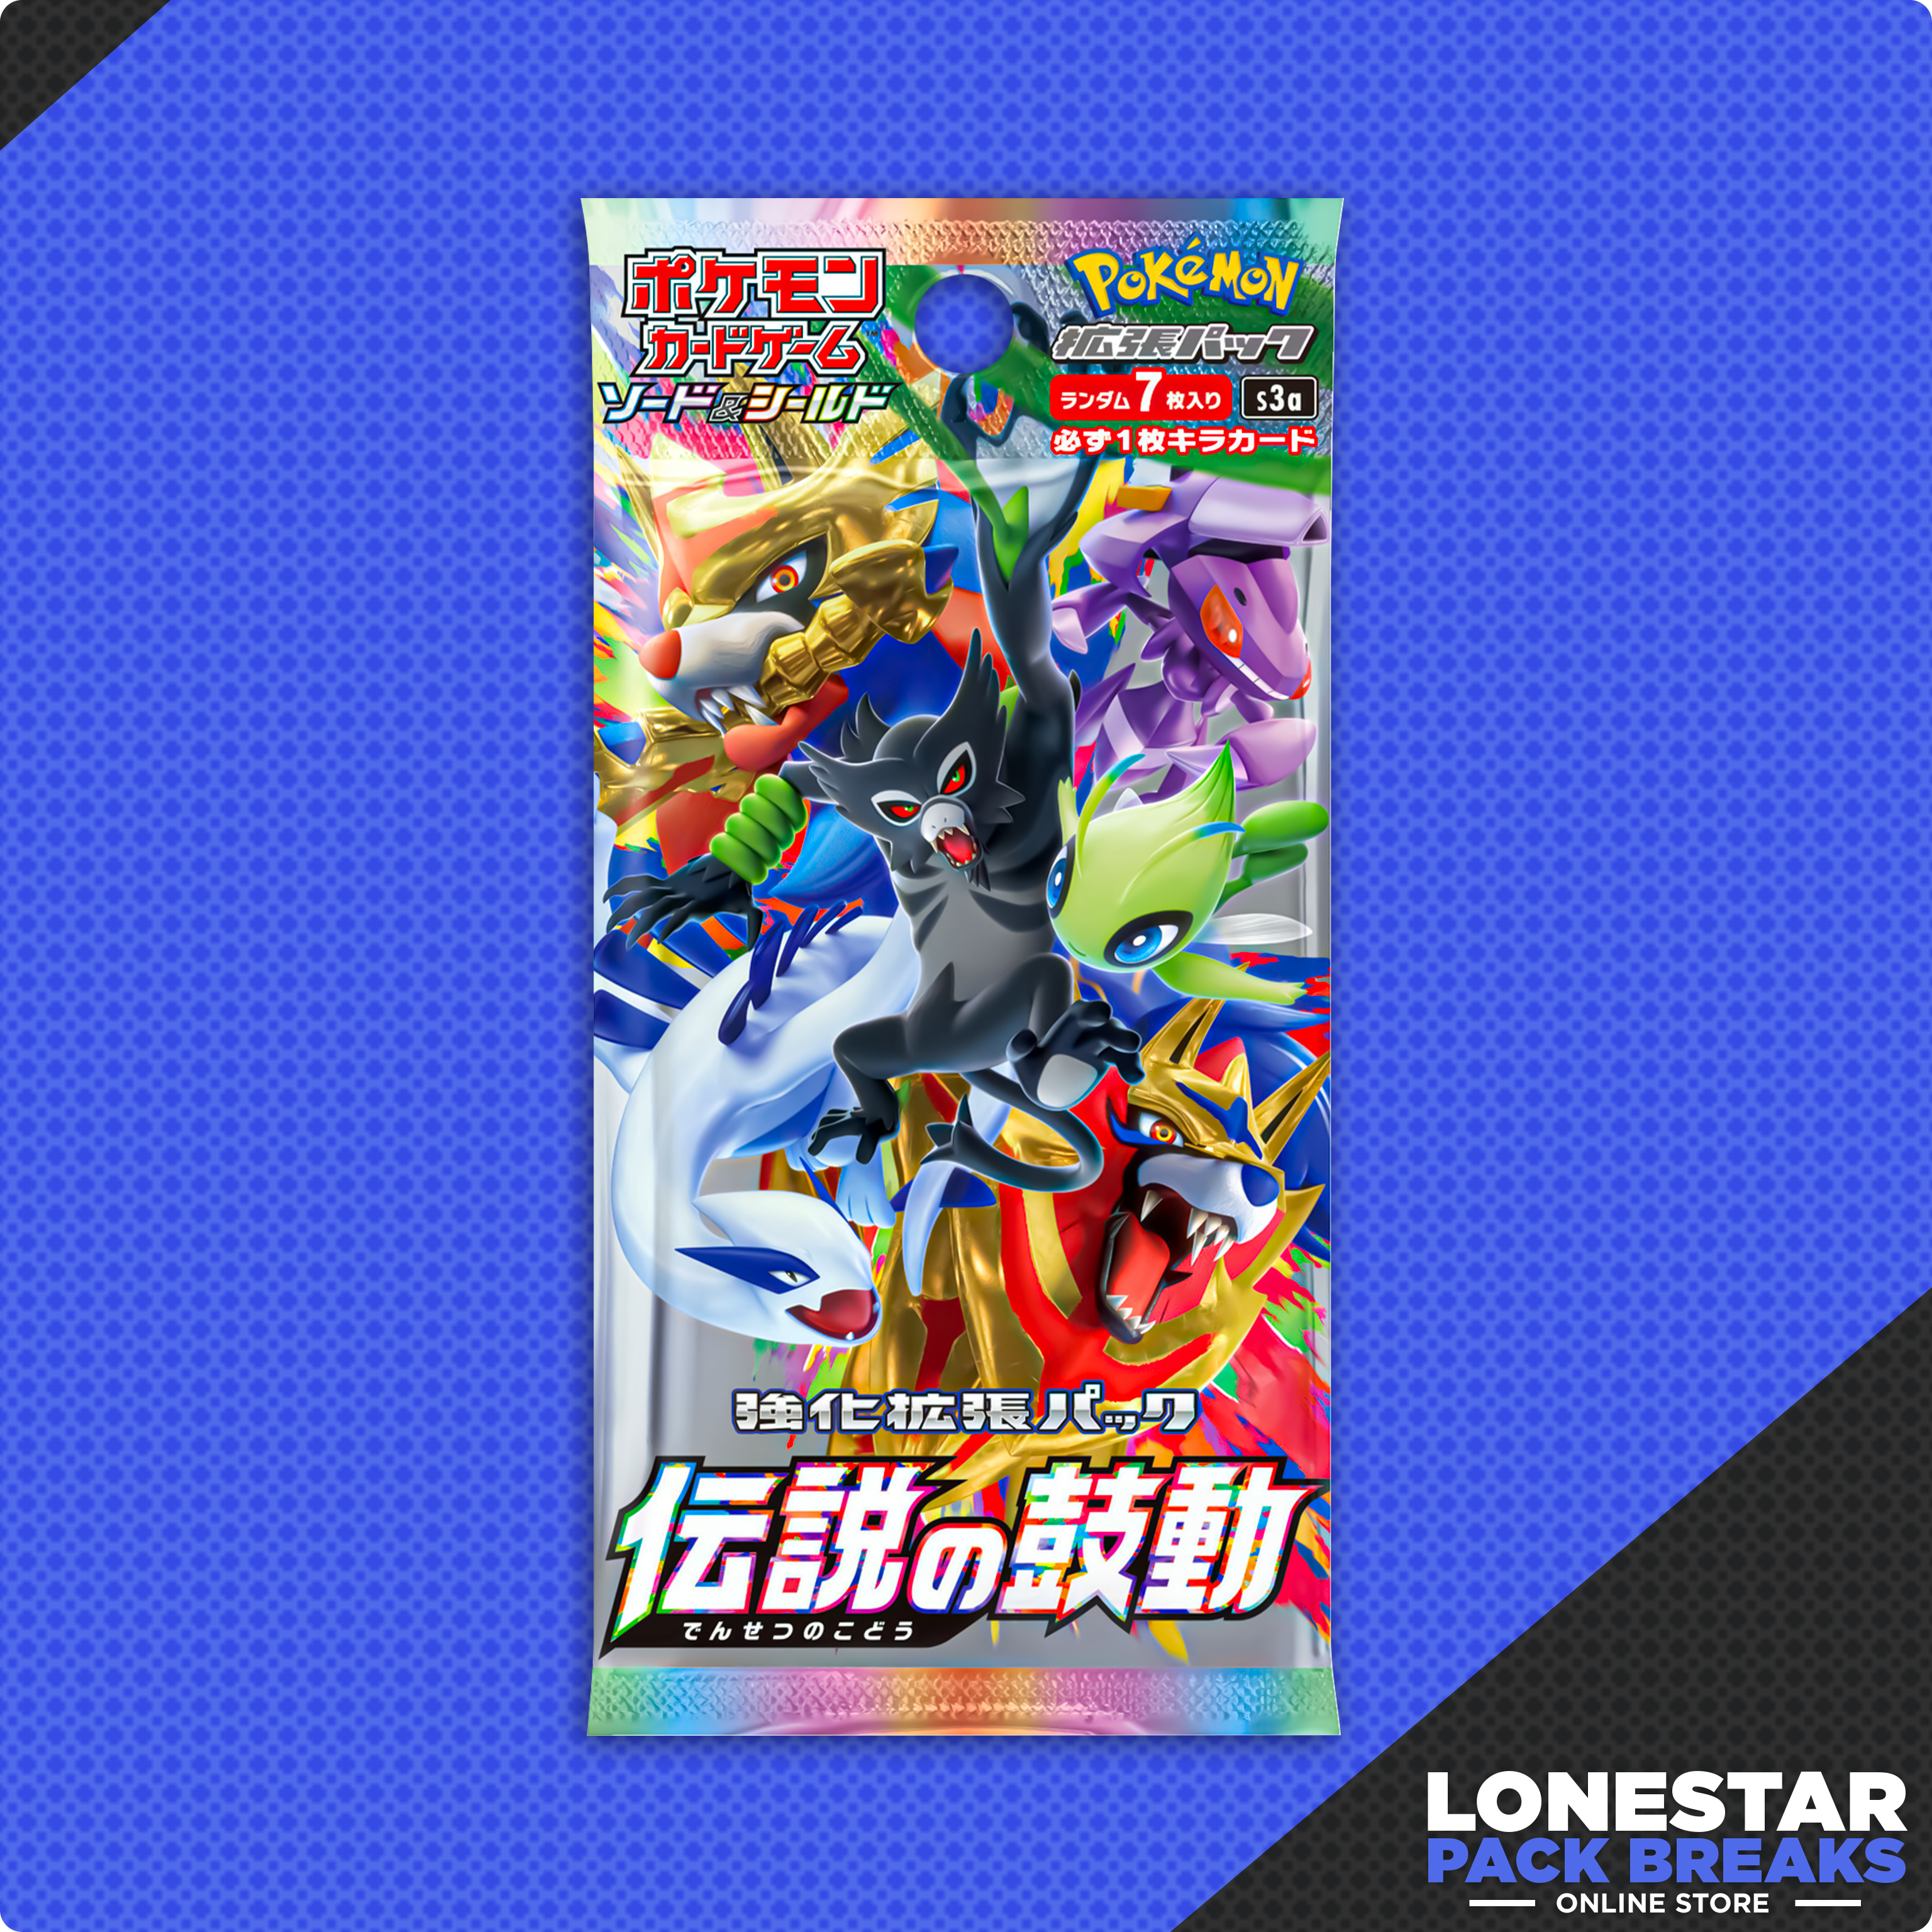 Legendary Heartbeat S3a Booster Pack-Japanese